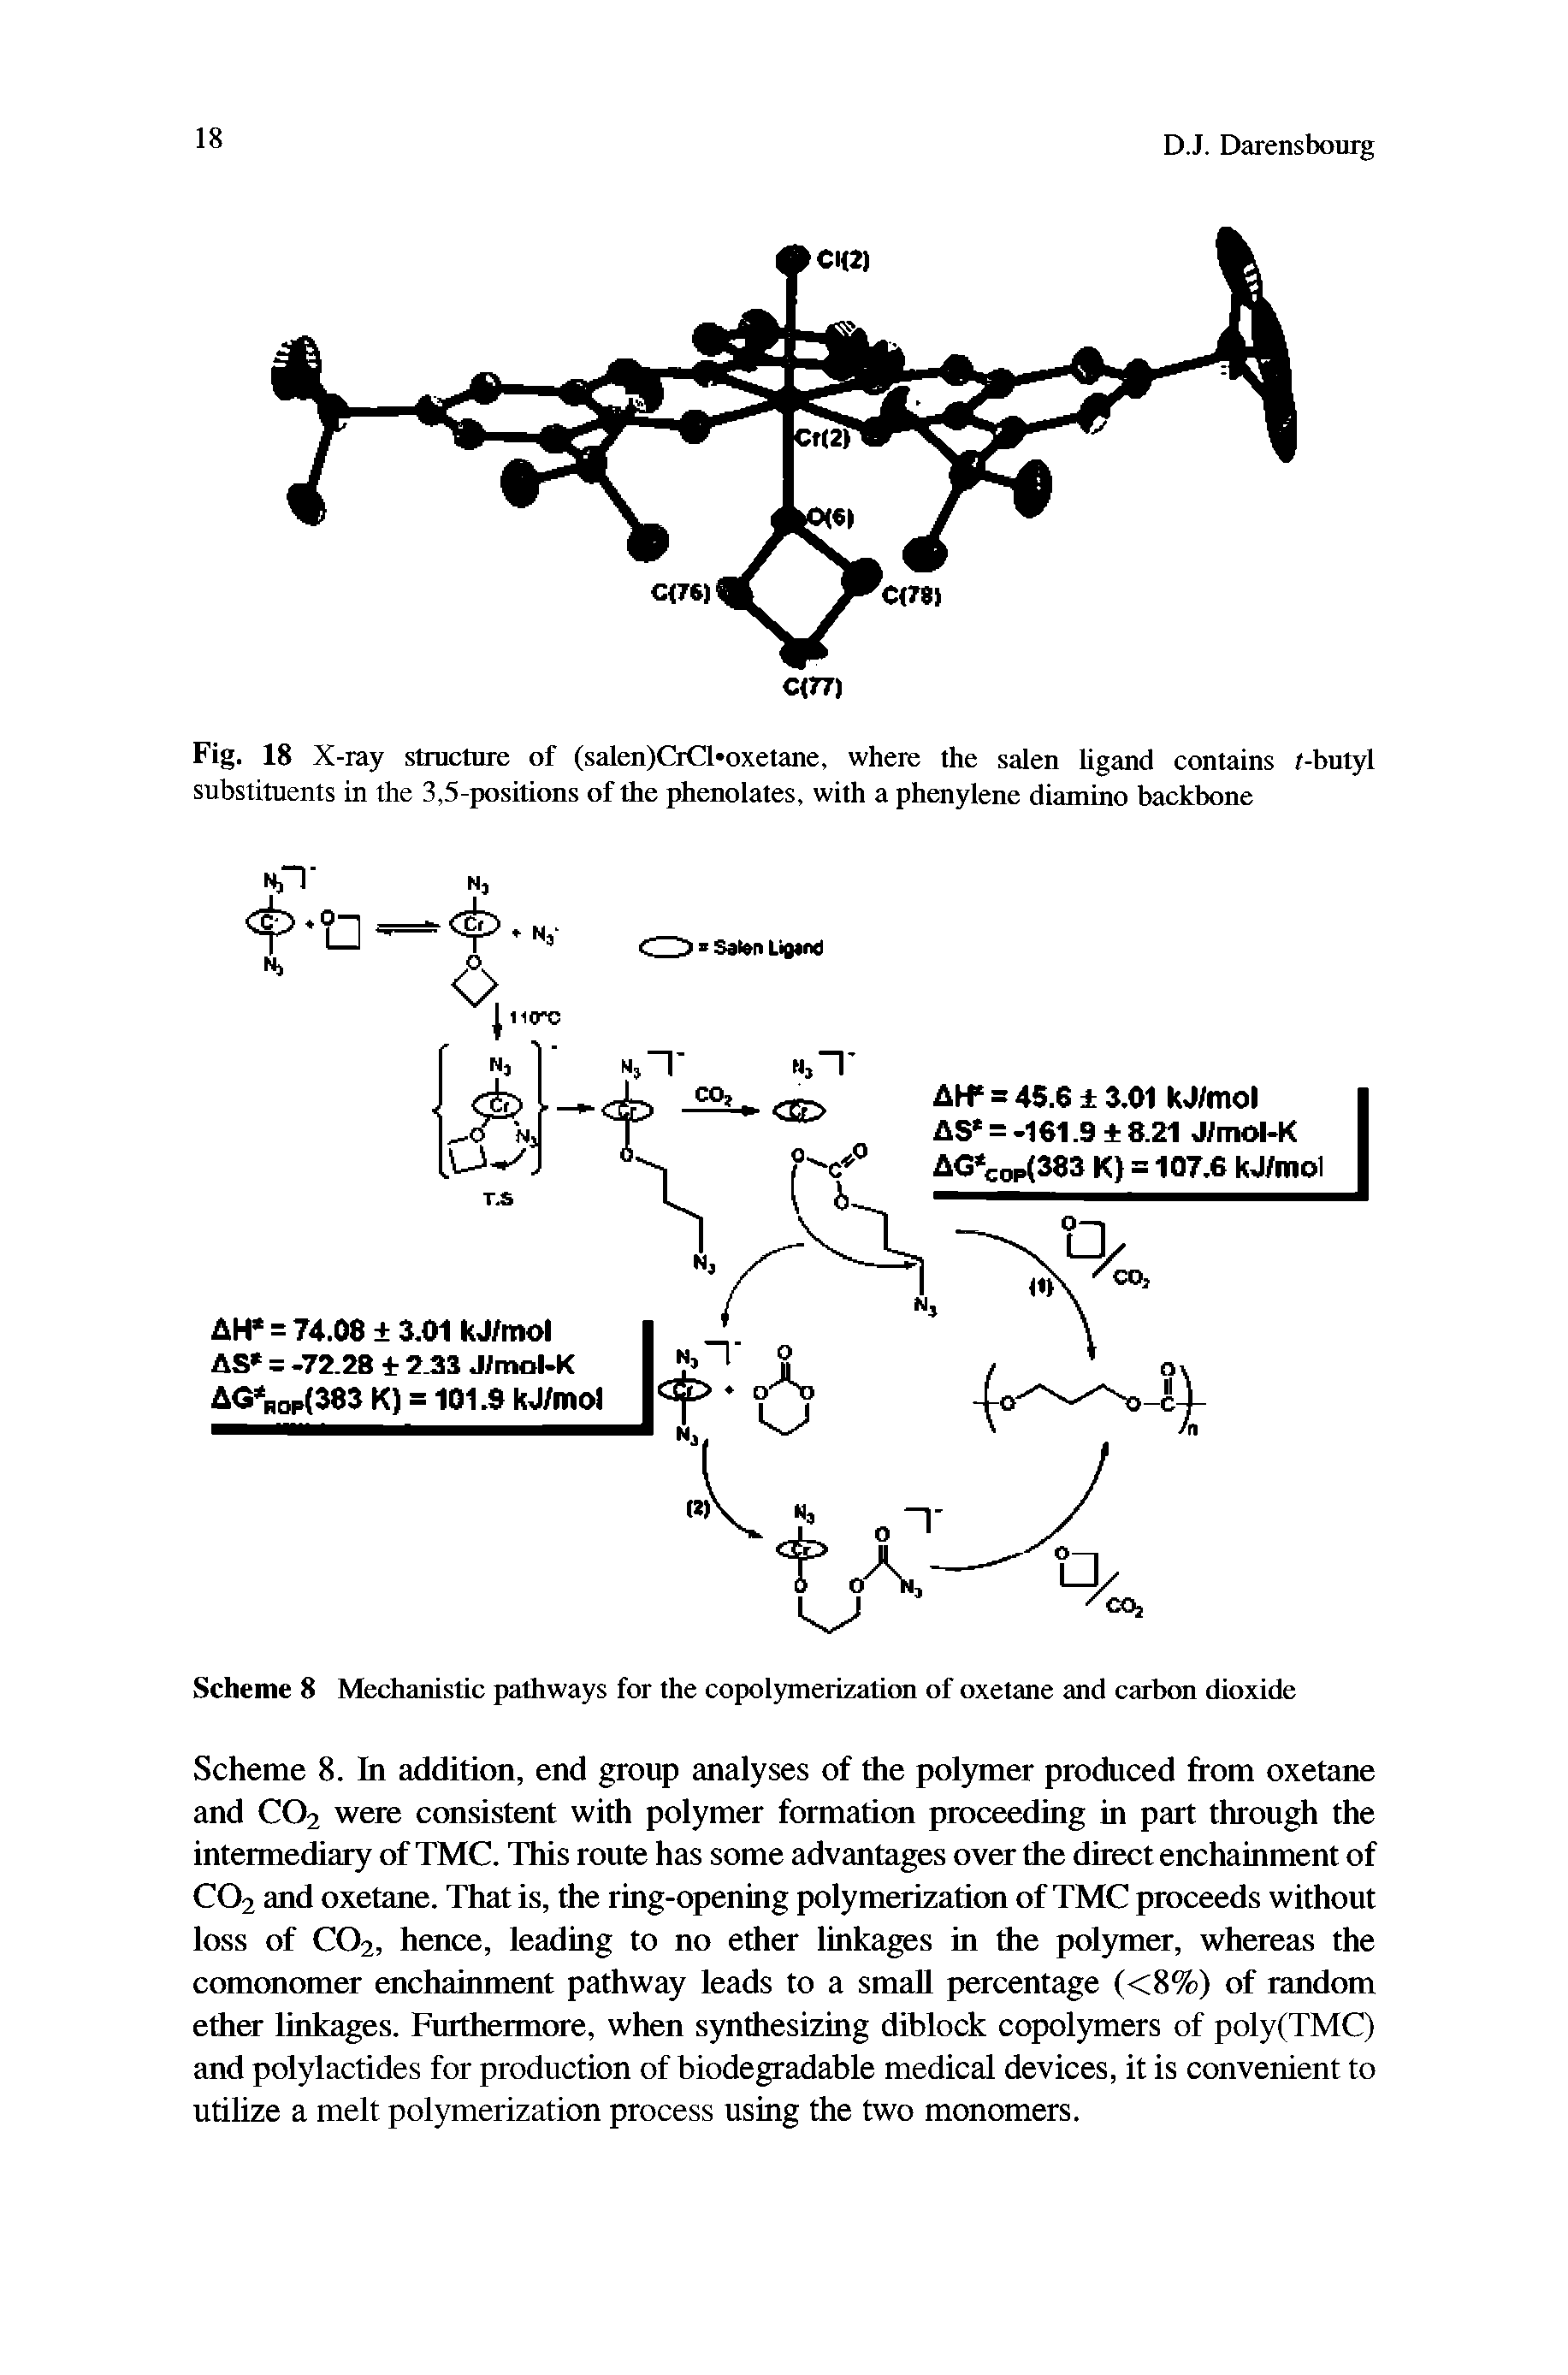 Scheme 8 Mechanistic pathways for the copolymerization of oxetane and carbon dioxide...